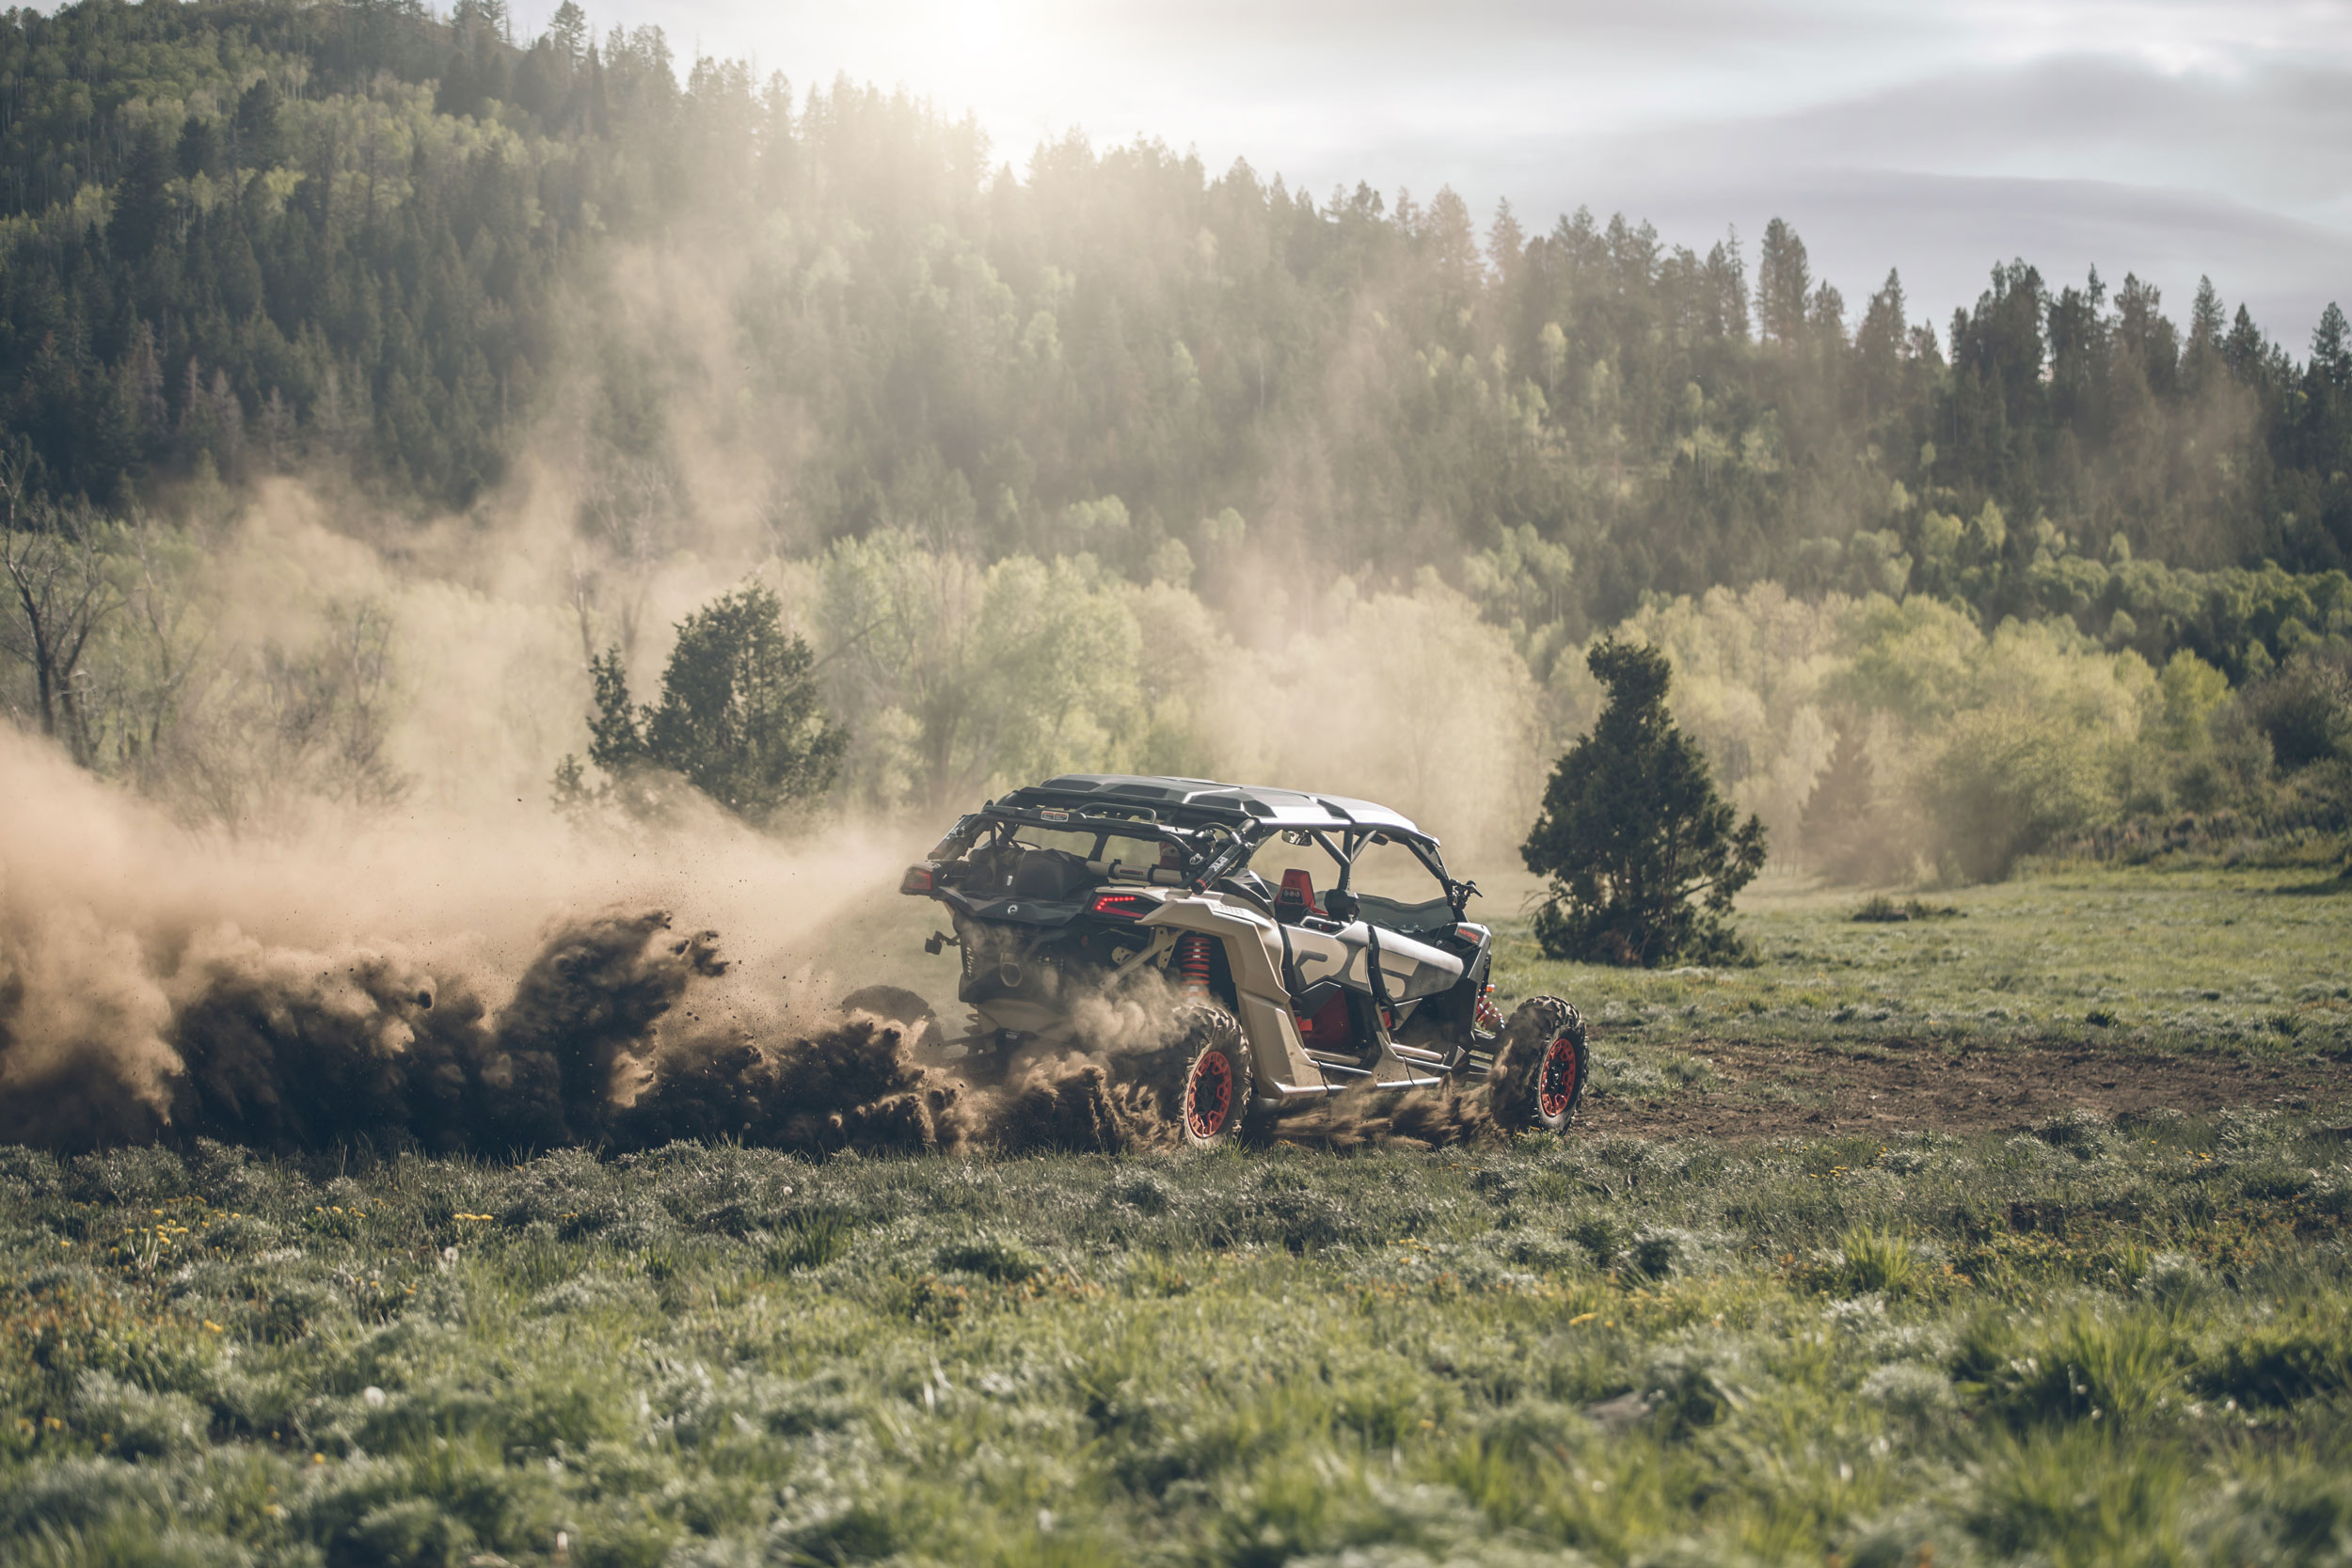 A Can-Am Maverick X3 X rs side-by-side drifting in a trail